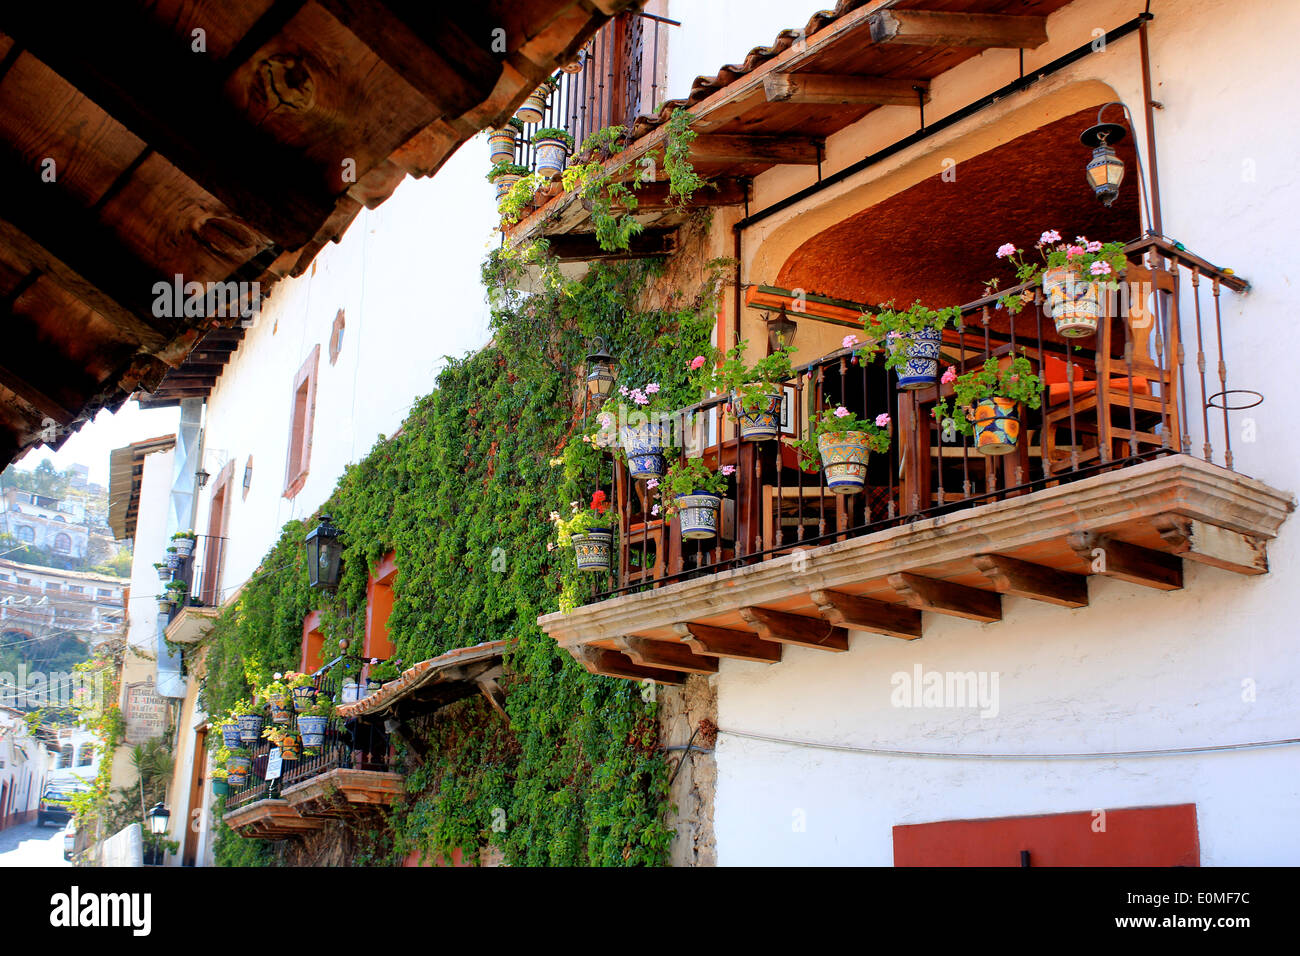 Wooden balcony filled with ceramic pots and flowers in Taxco, Guerrero, Mexico Stock Photo